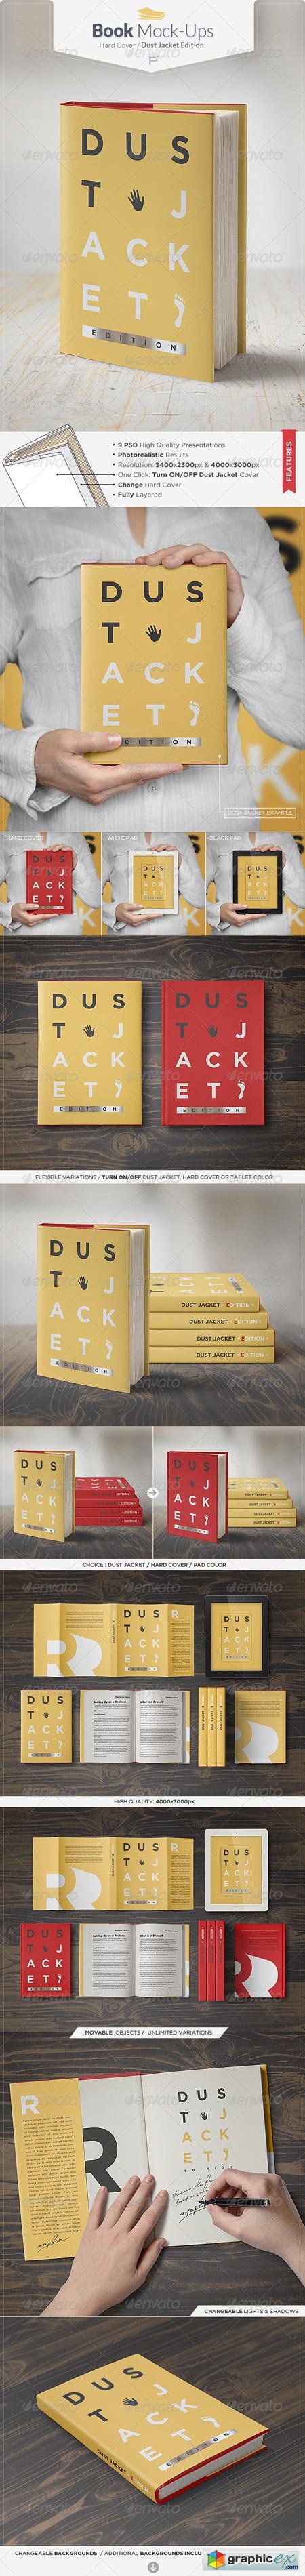 Book Mock-Up Dust Jacket Edition 7735188